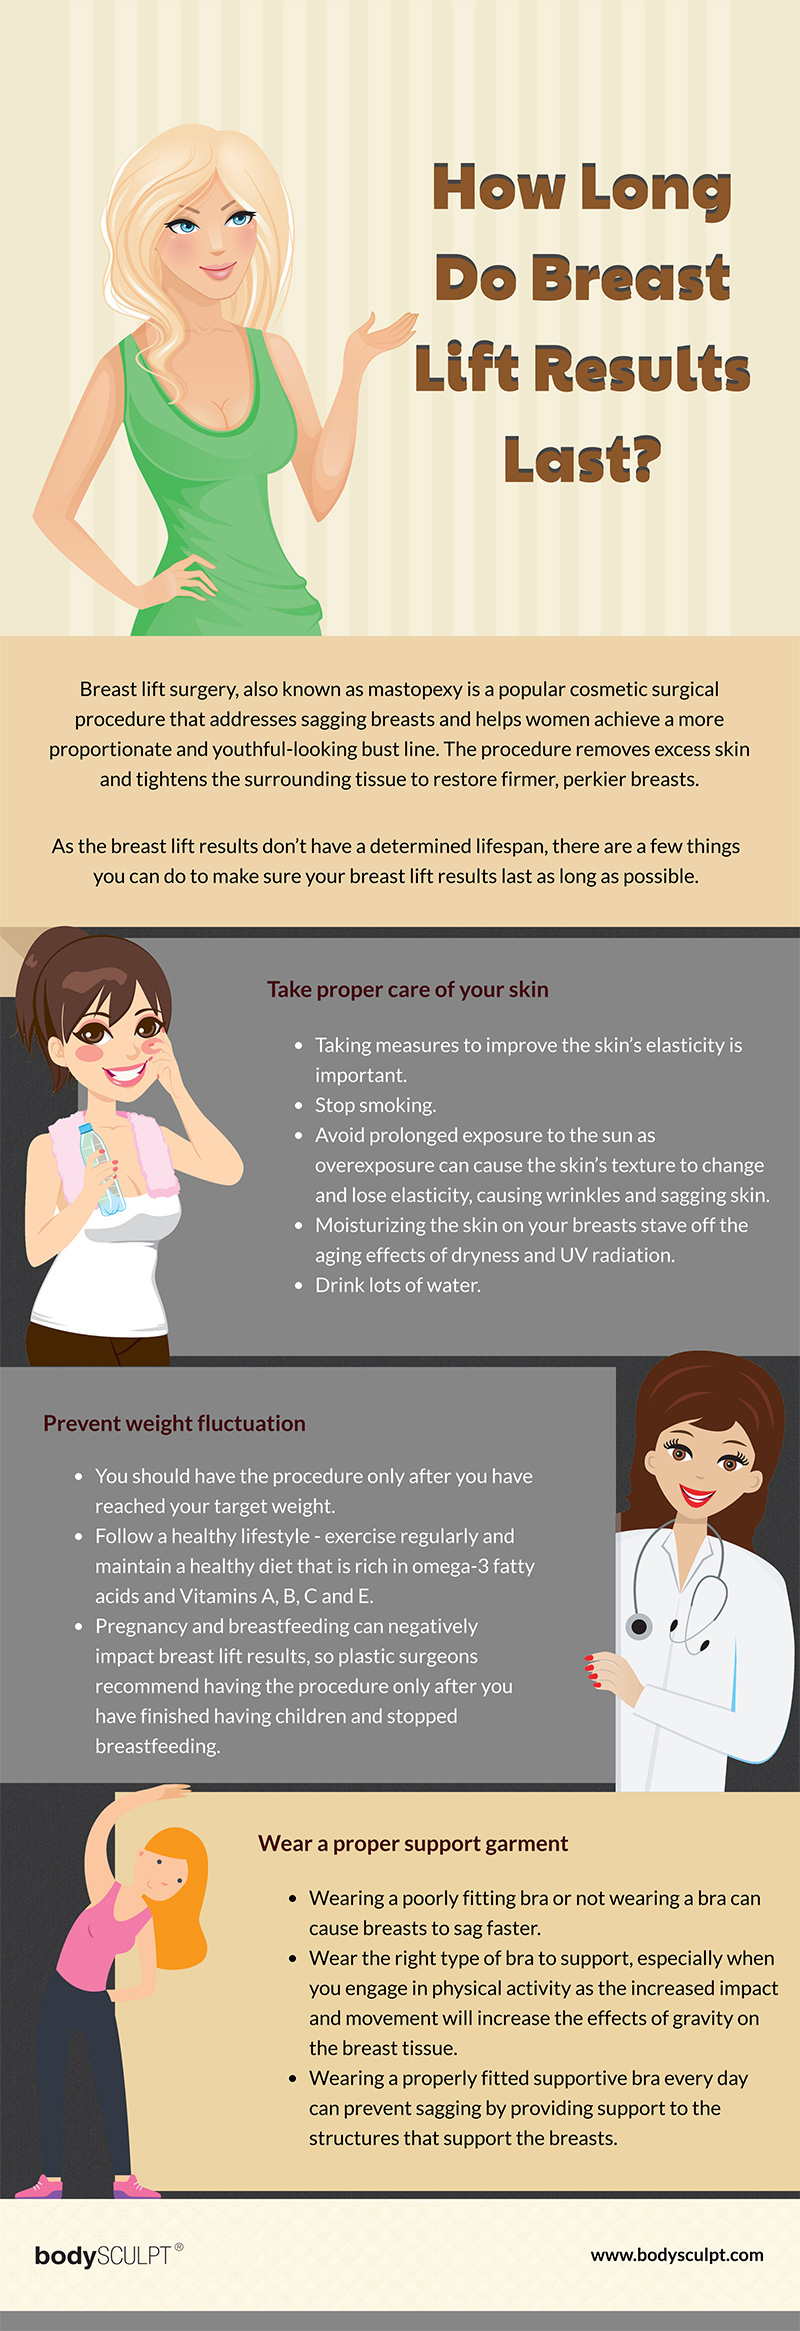 Breast Lift: How Long Do Results Last? [INFOGRAPHIC]